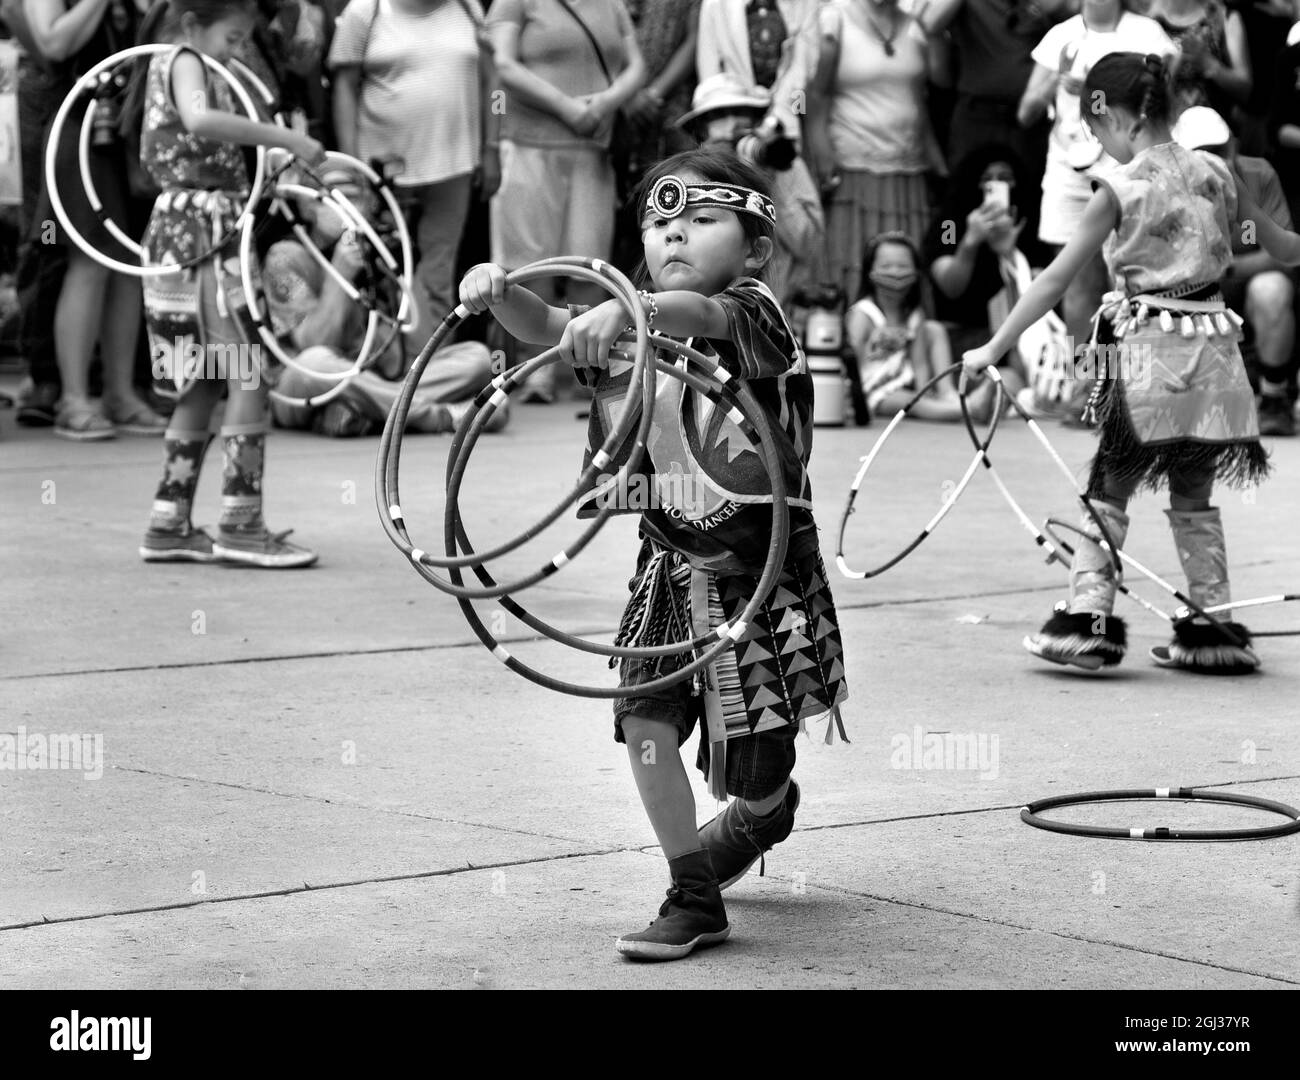 Young Native American hoop dancers perform at the annual Santa Fe Indian Market in Santa Fe, New Mexico. Stock Photo